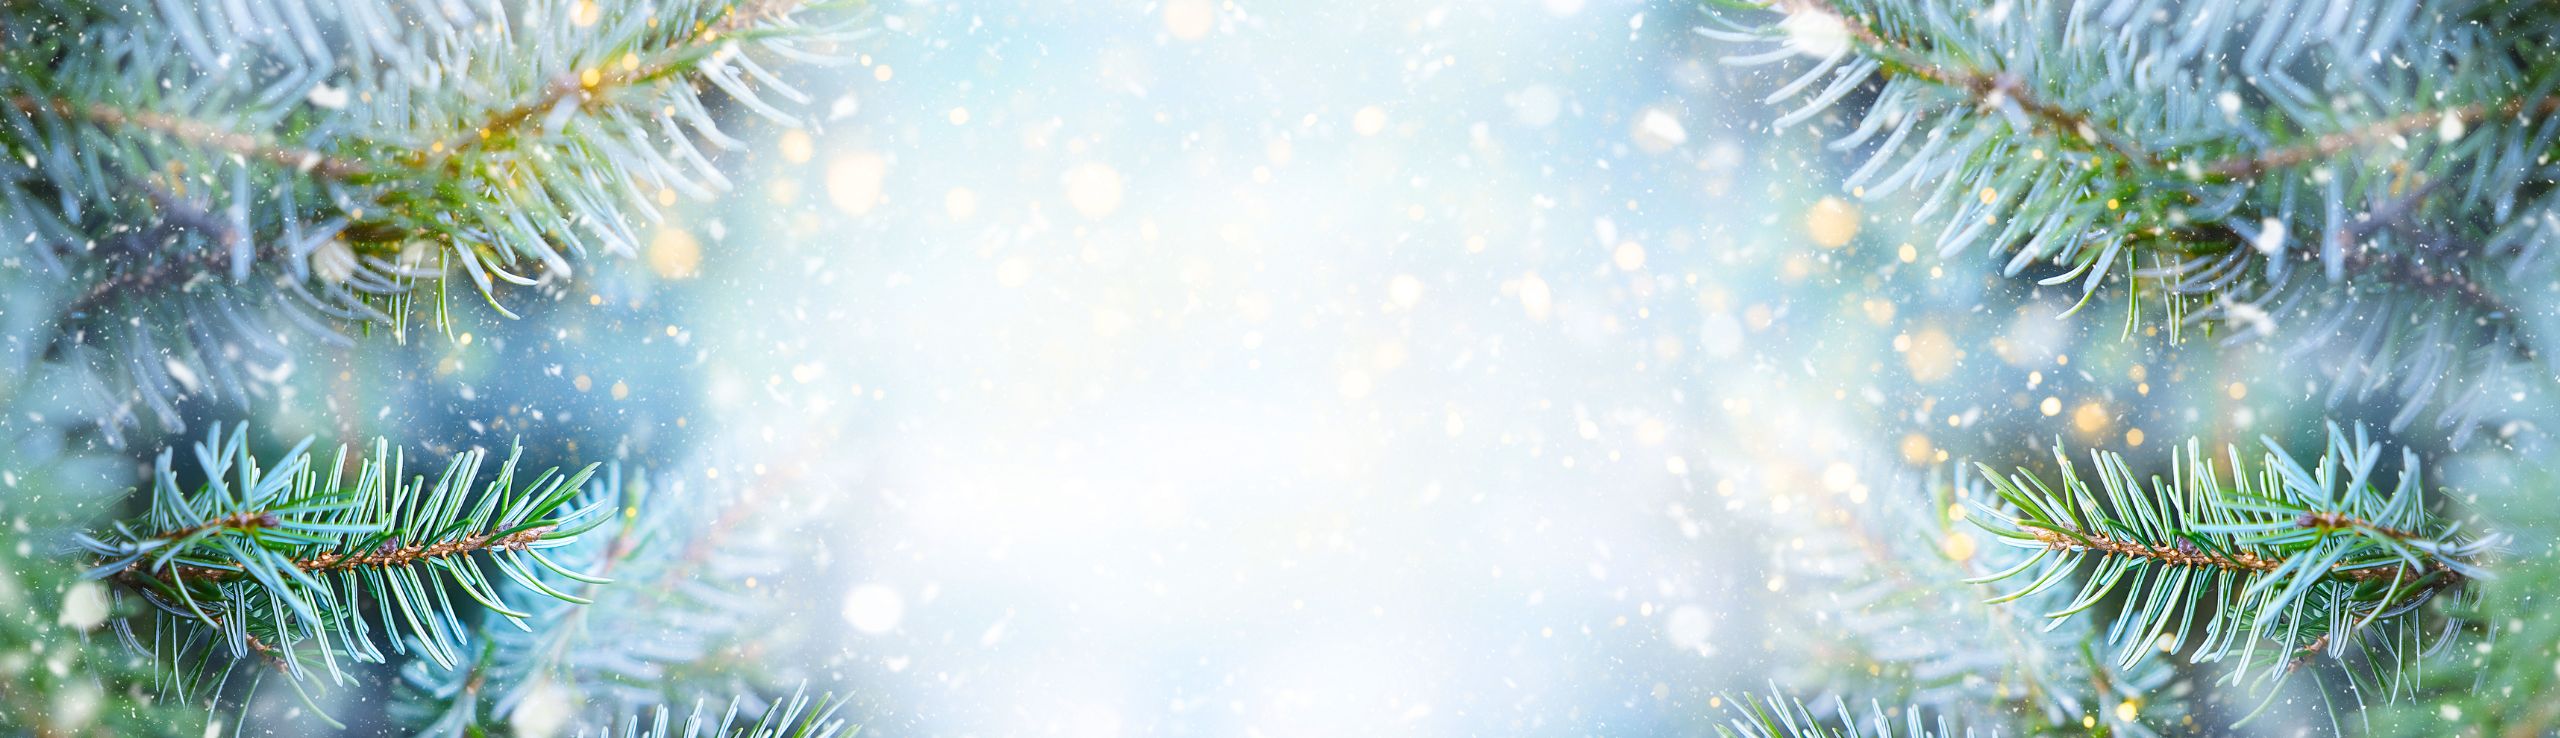 Background image of snowy evergreen branches.